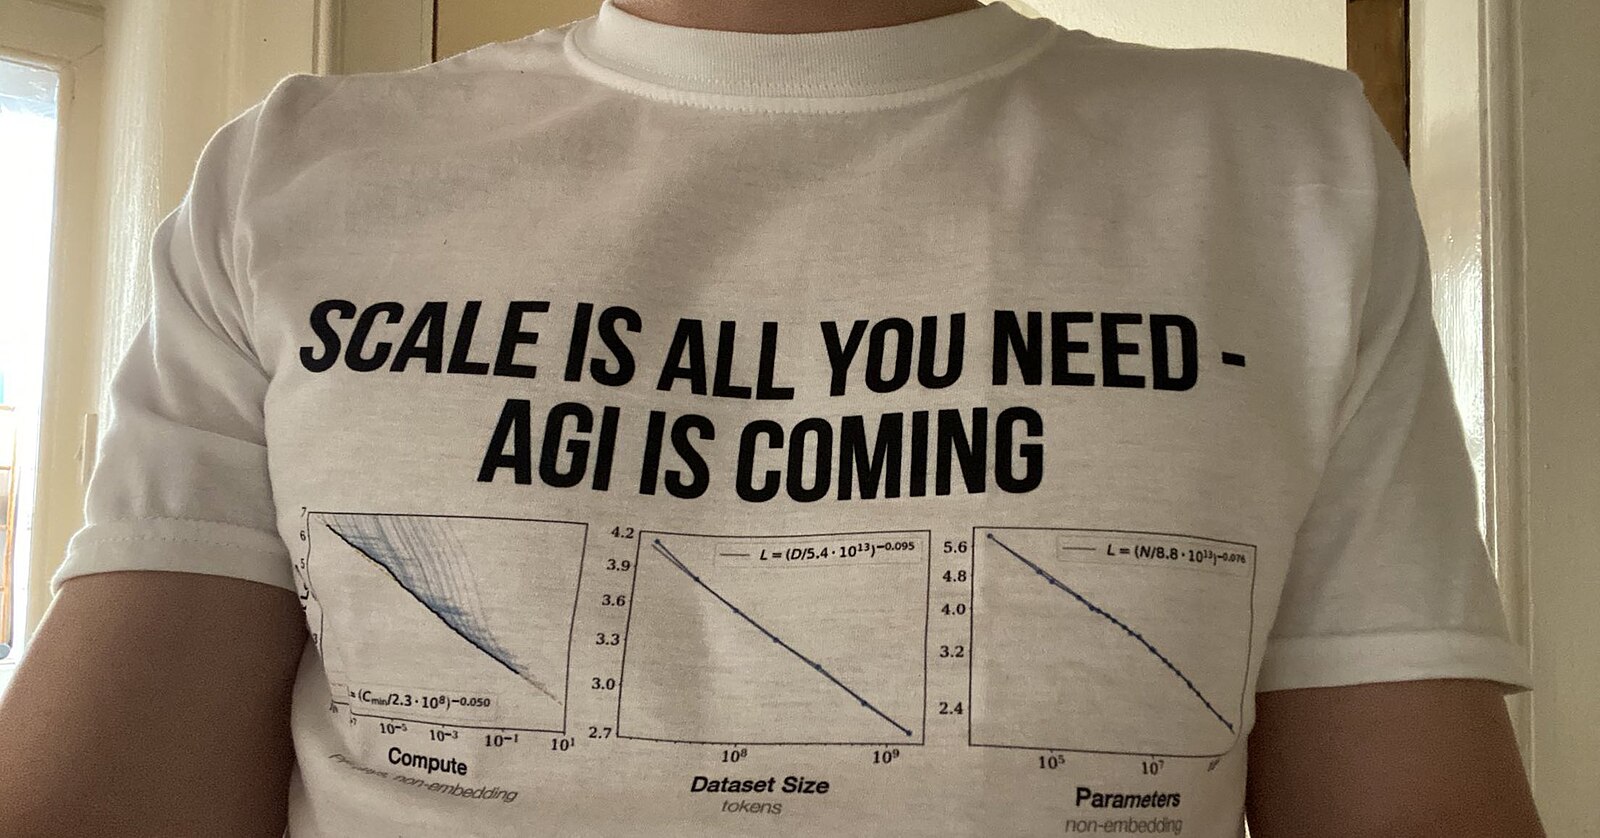 Person with a shirt that reads: "SCALE IS ALL YOU NEED - AGI IS COMING" above three graphs demonstrating the 'AI scaling laws'